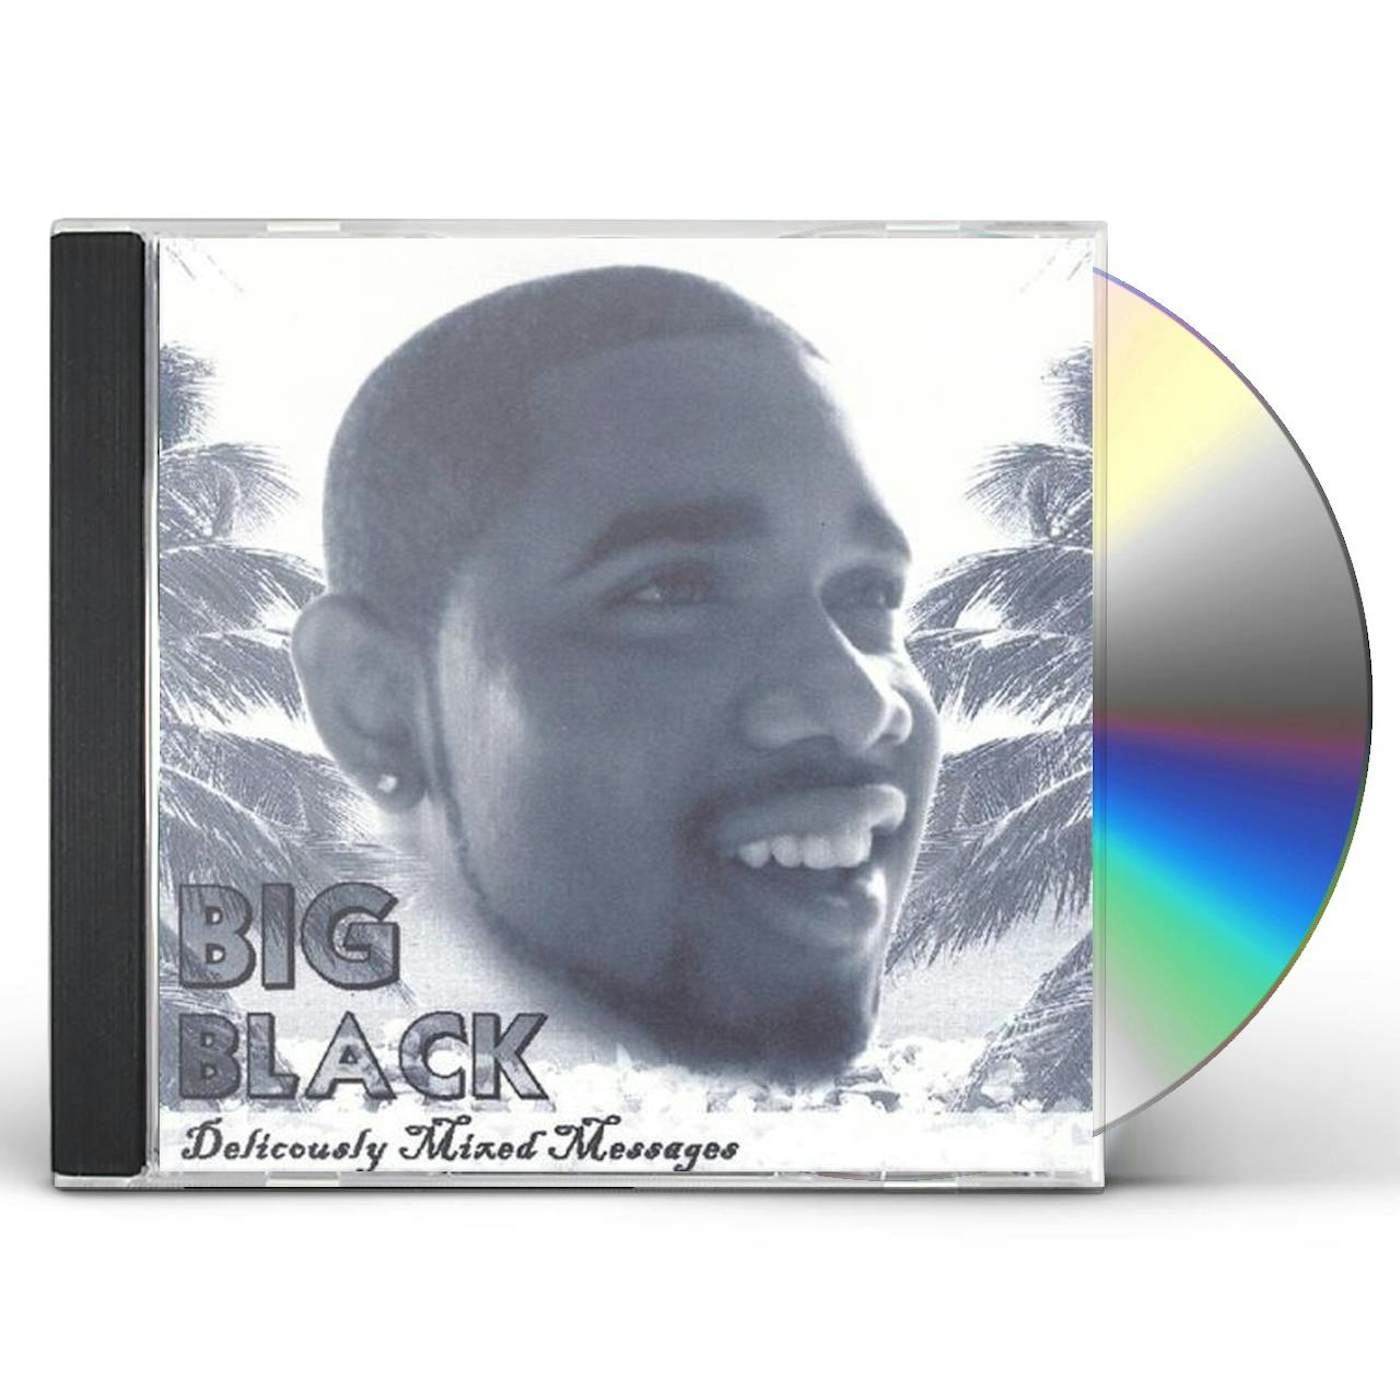 Big Black DELICIOUSLY MIXED MESSAGES CD